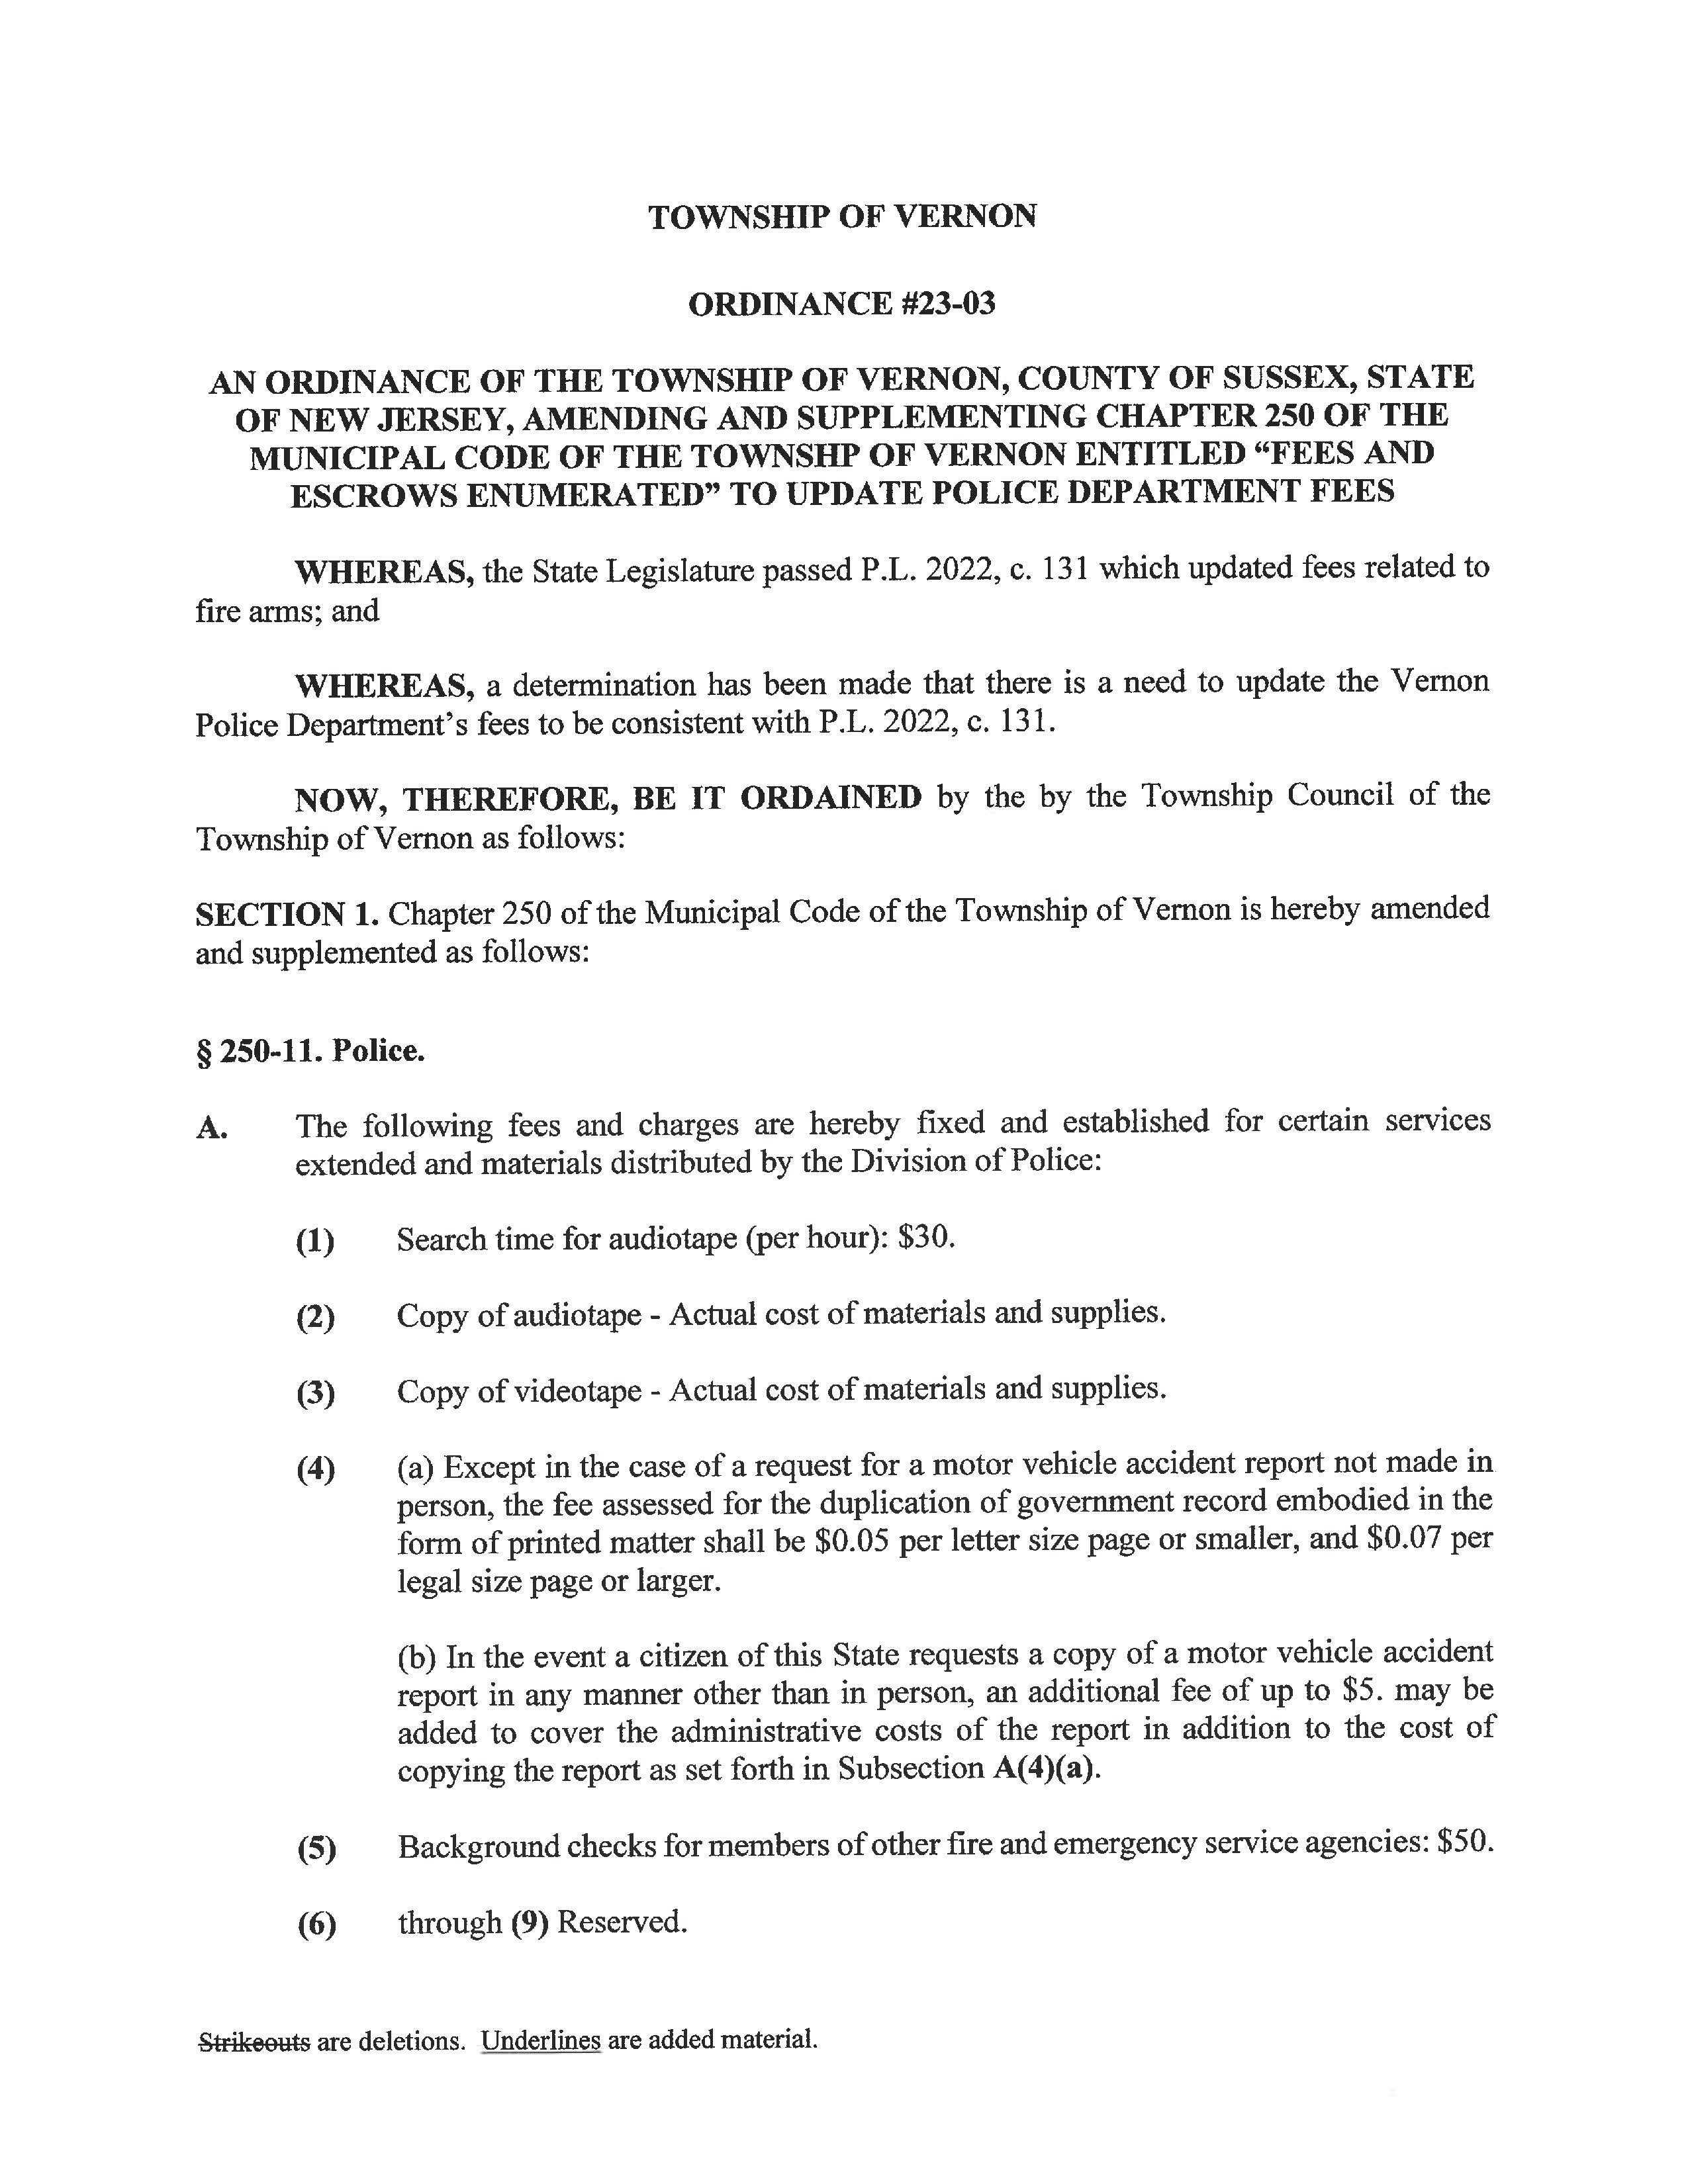 23 03 Ordinance Amending Police Fees Page 1